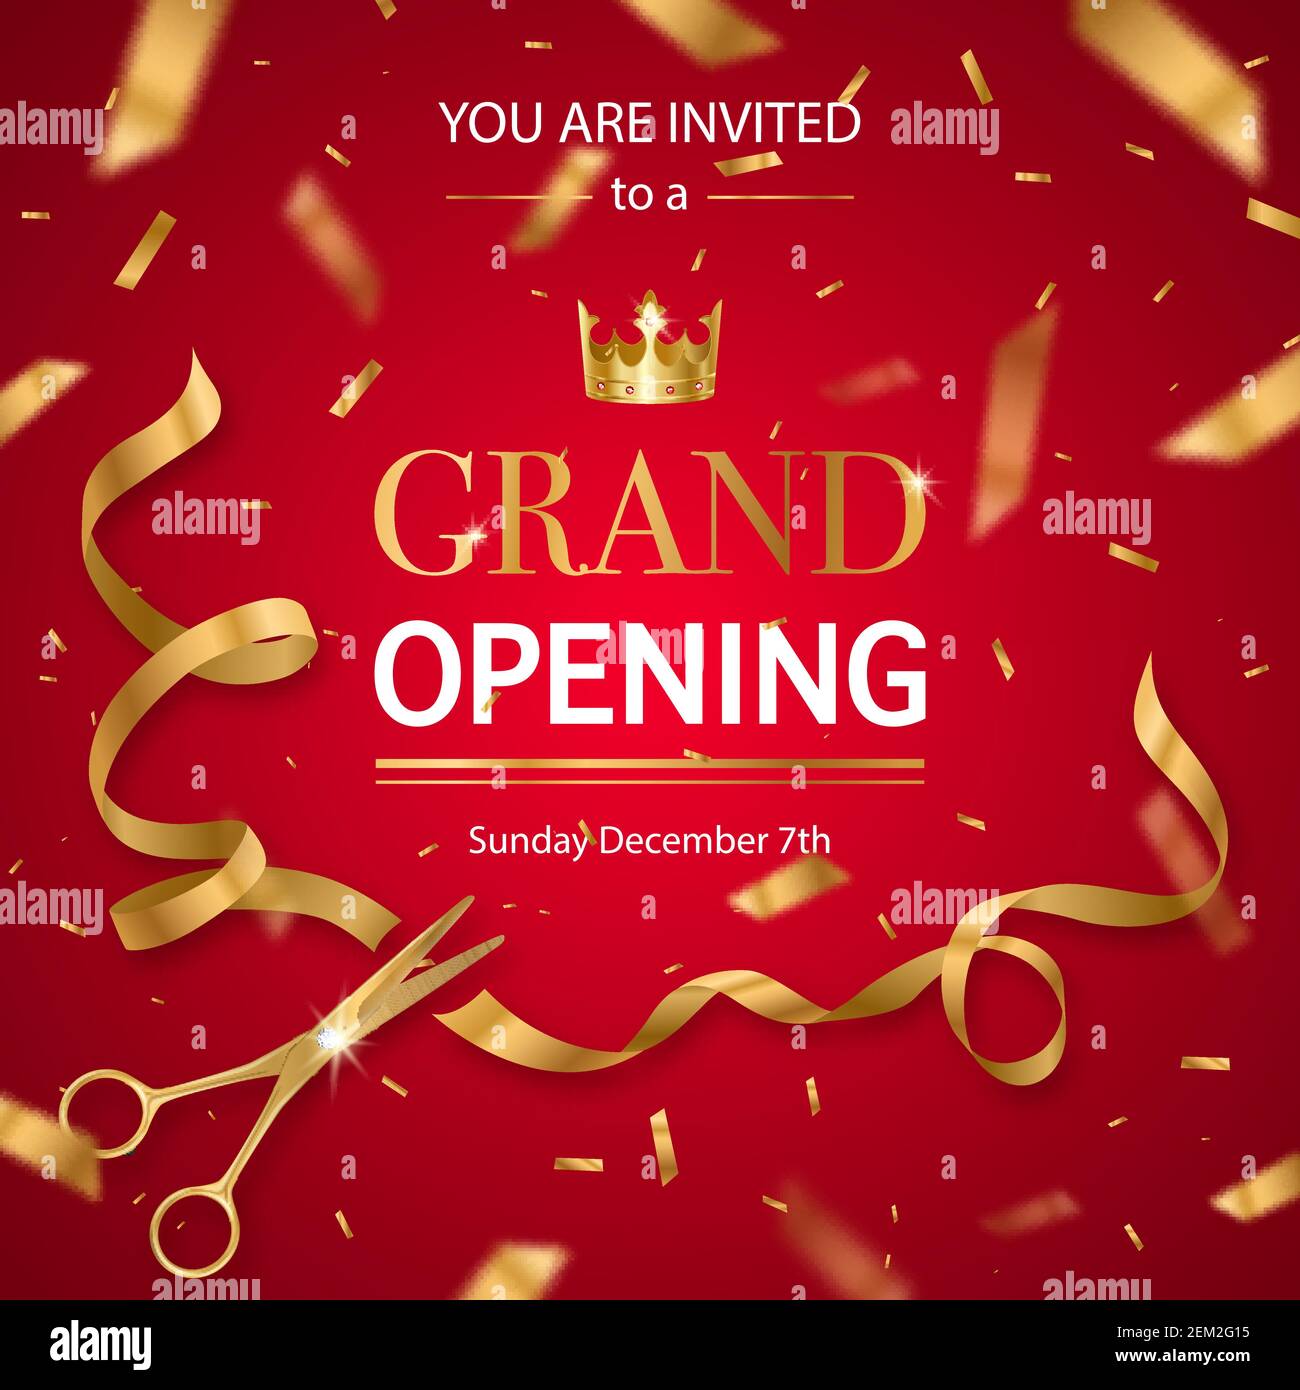 Grand opening invitation card poster with realistic golden scissors cutting ribbon and crown red background vector illustration Stock Vector